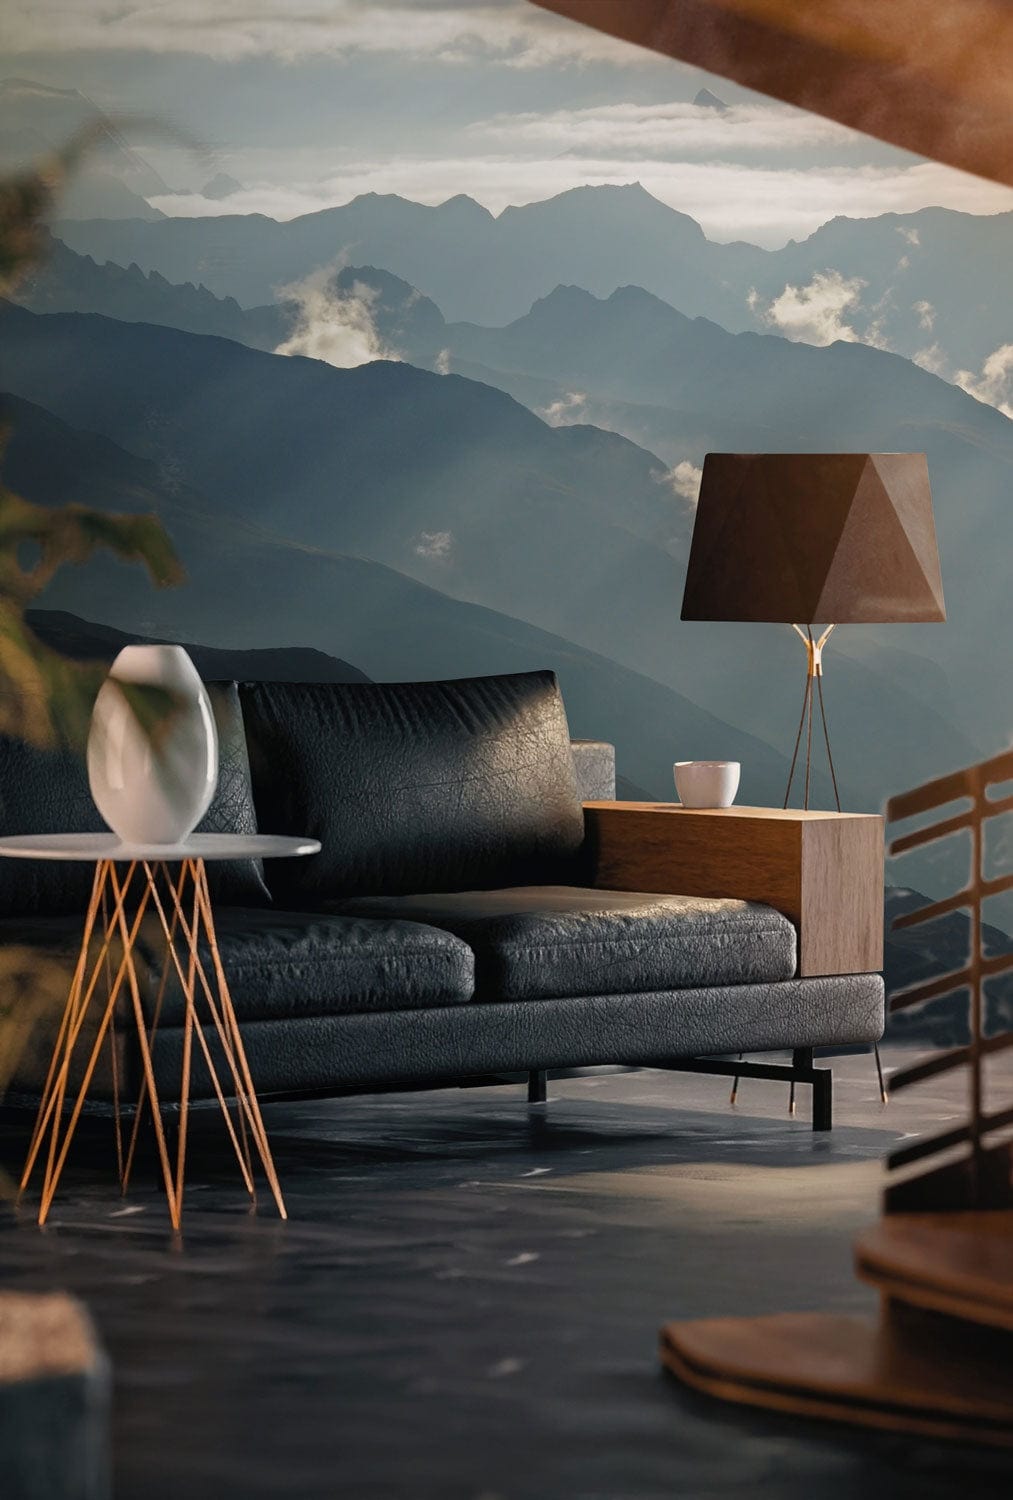 Wallpaper mural with a mountain range and landscapes, ideal for use in the living room